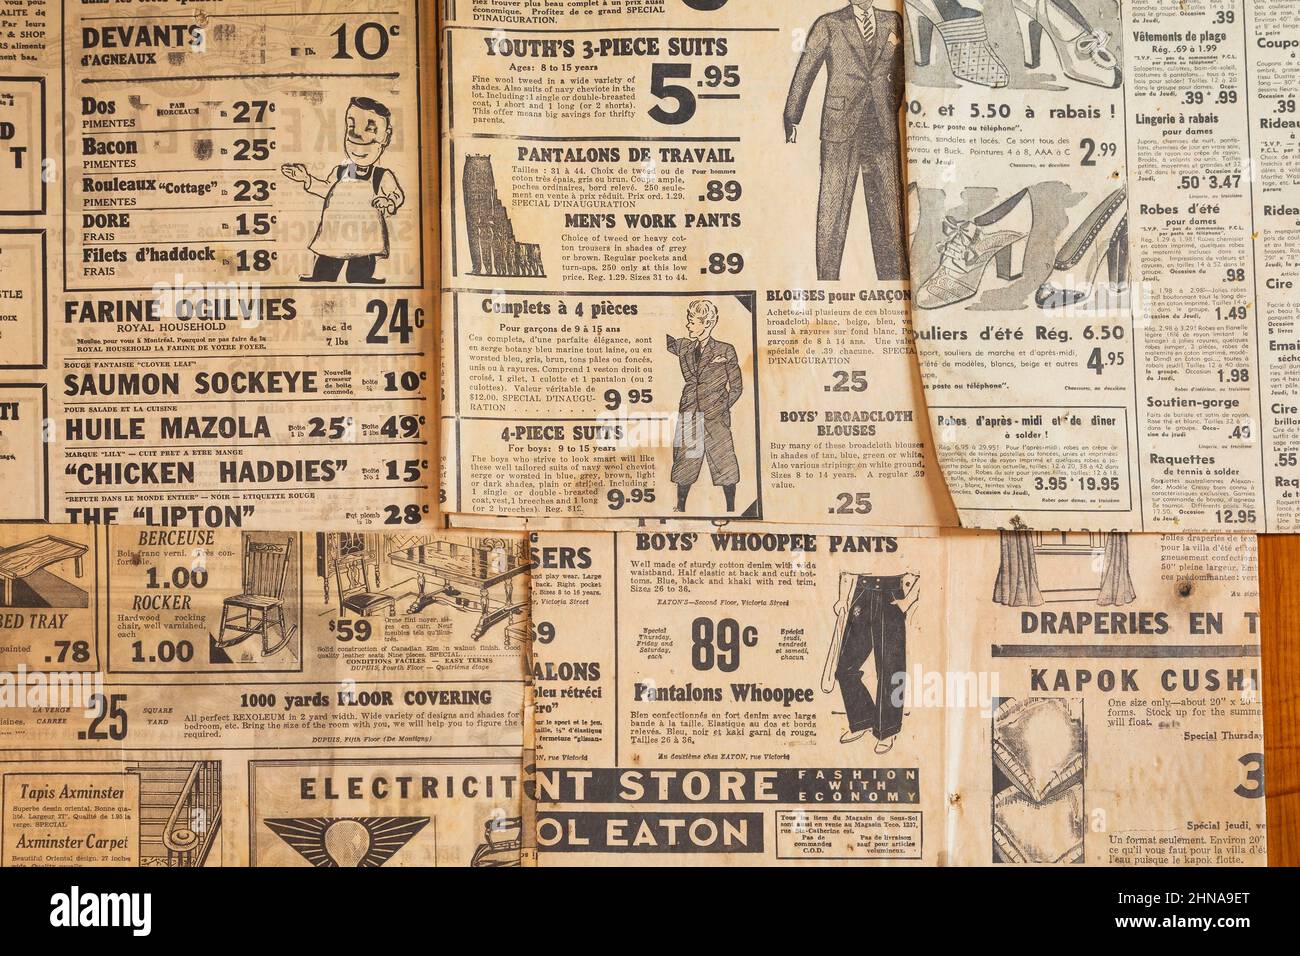 Bilingual French and English worded clothing and product advertisements printed in old newspapers from 1930s, 40s, 50s. Stock Photo